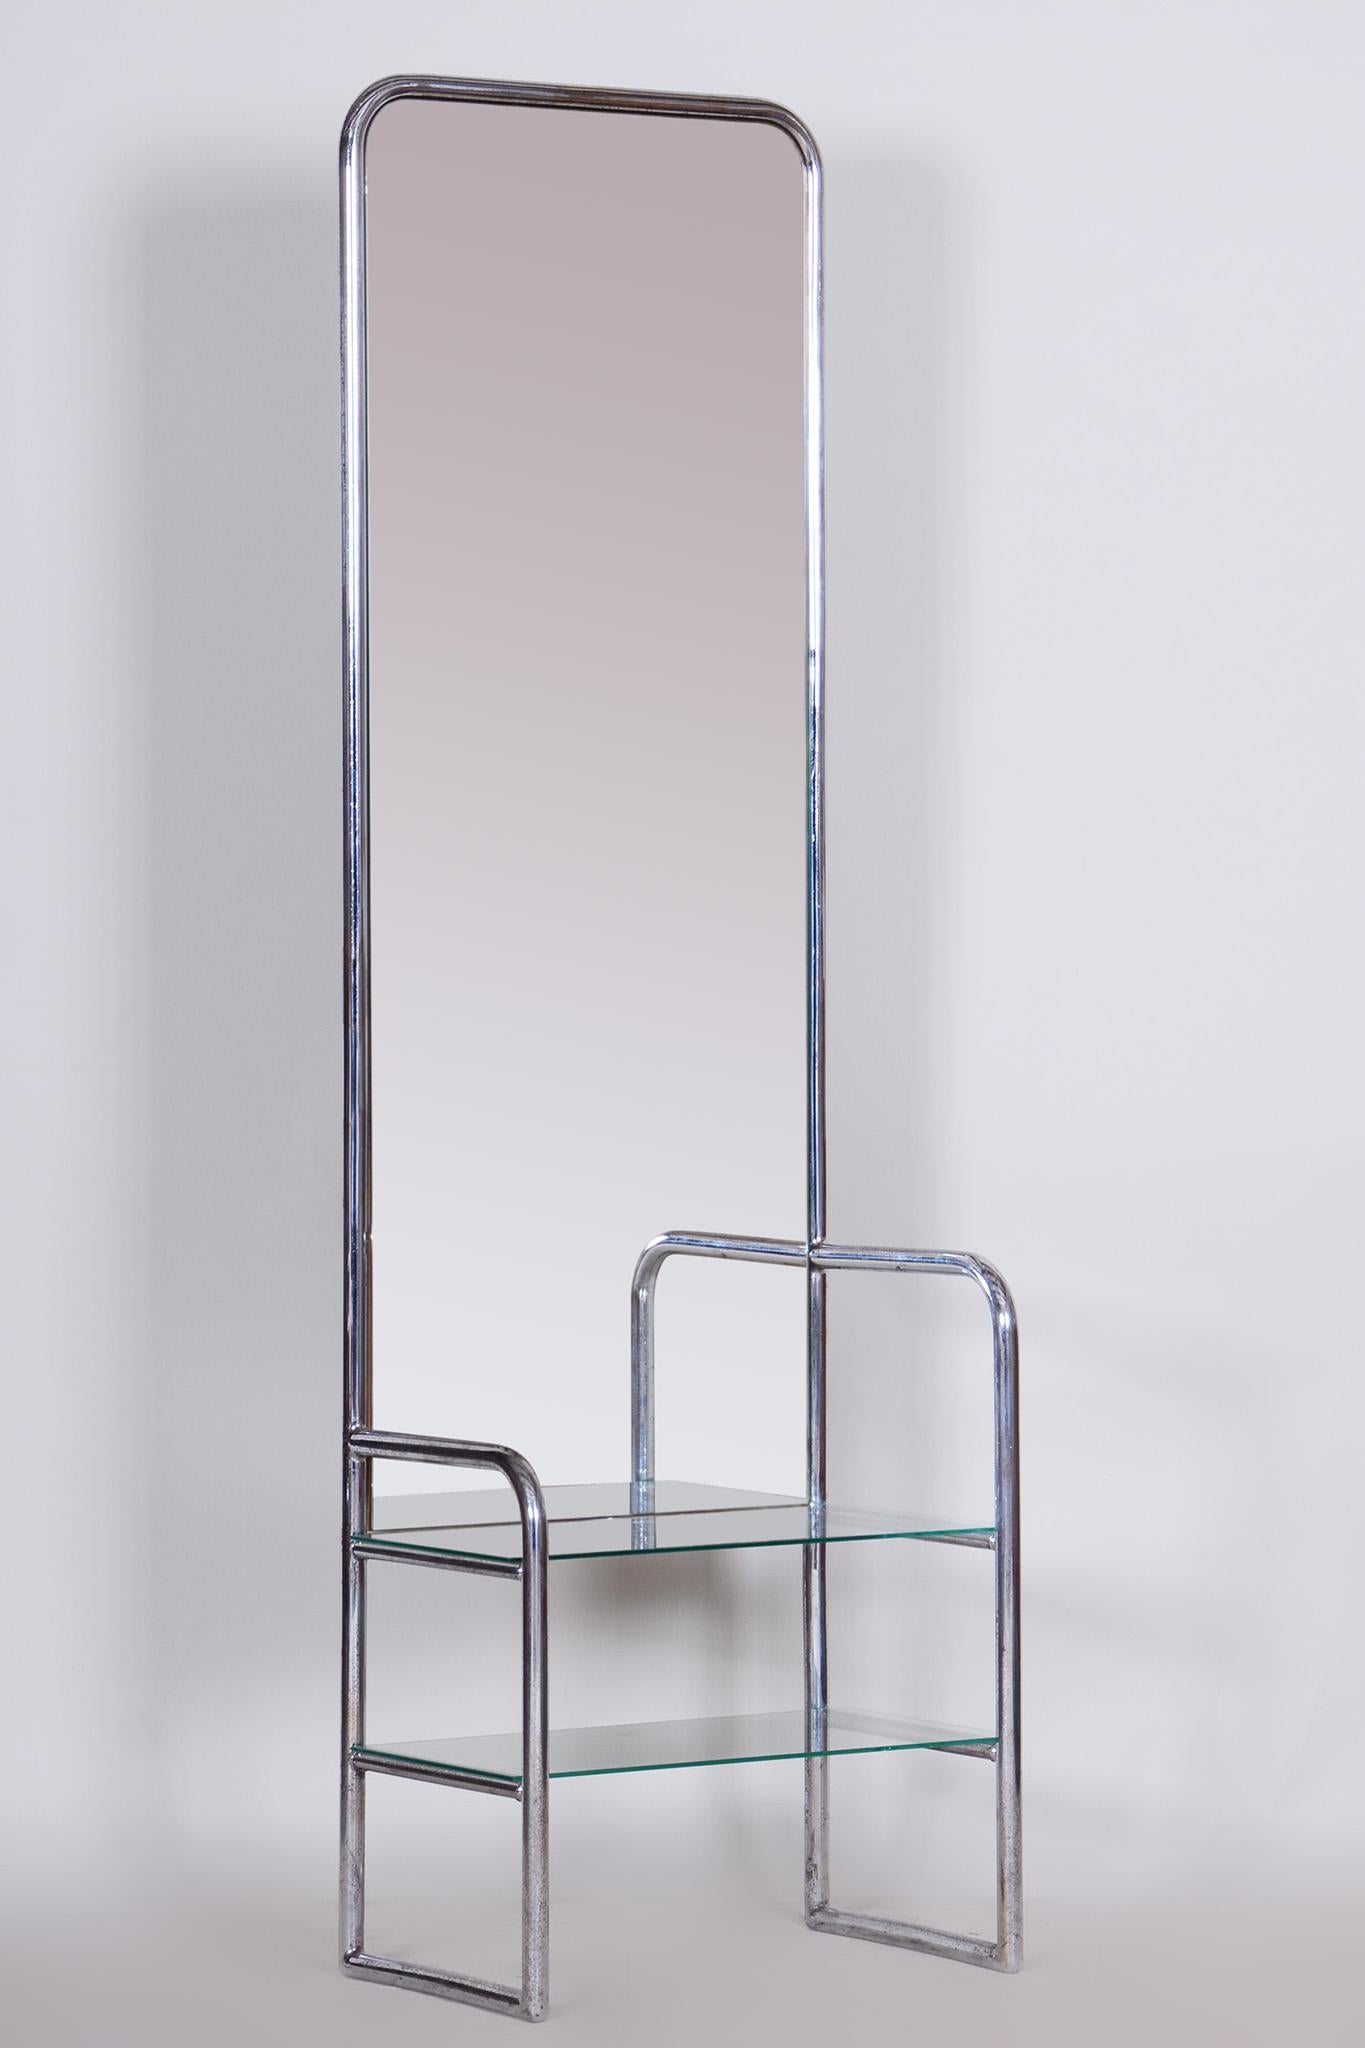 Bauhaus dressing mirror by Mucke-Melder.

Period: 1930-1939
Source: Czechia
Maker: Mucke-Melder
Material: Chrome-plated Steel, Mirror, Glass

The chrome parts have been cleaned and professionally restored. 

It has been fully restored by